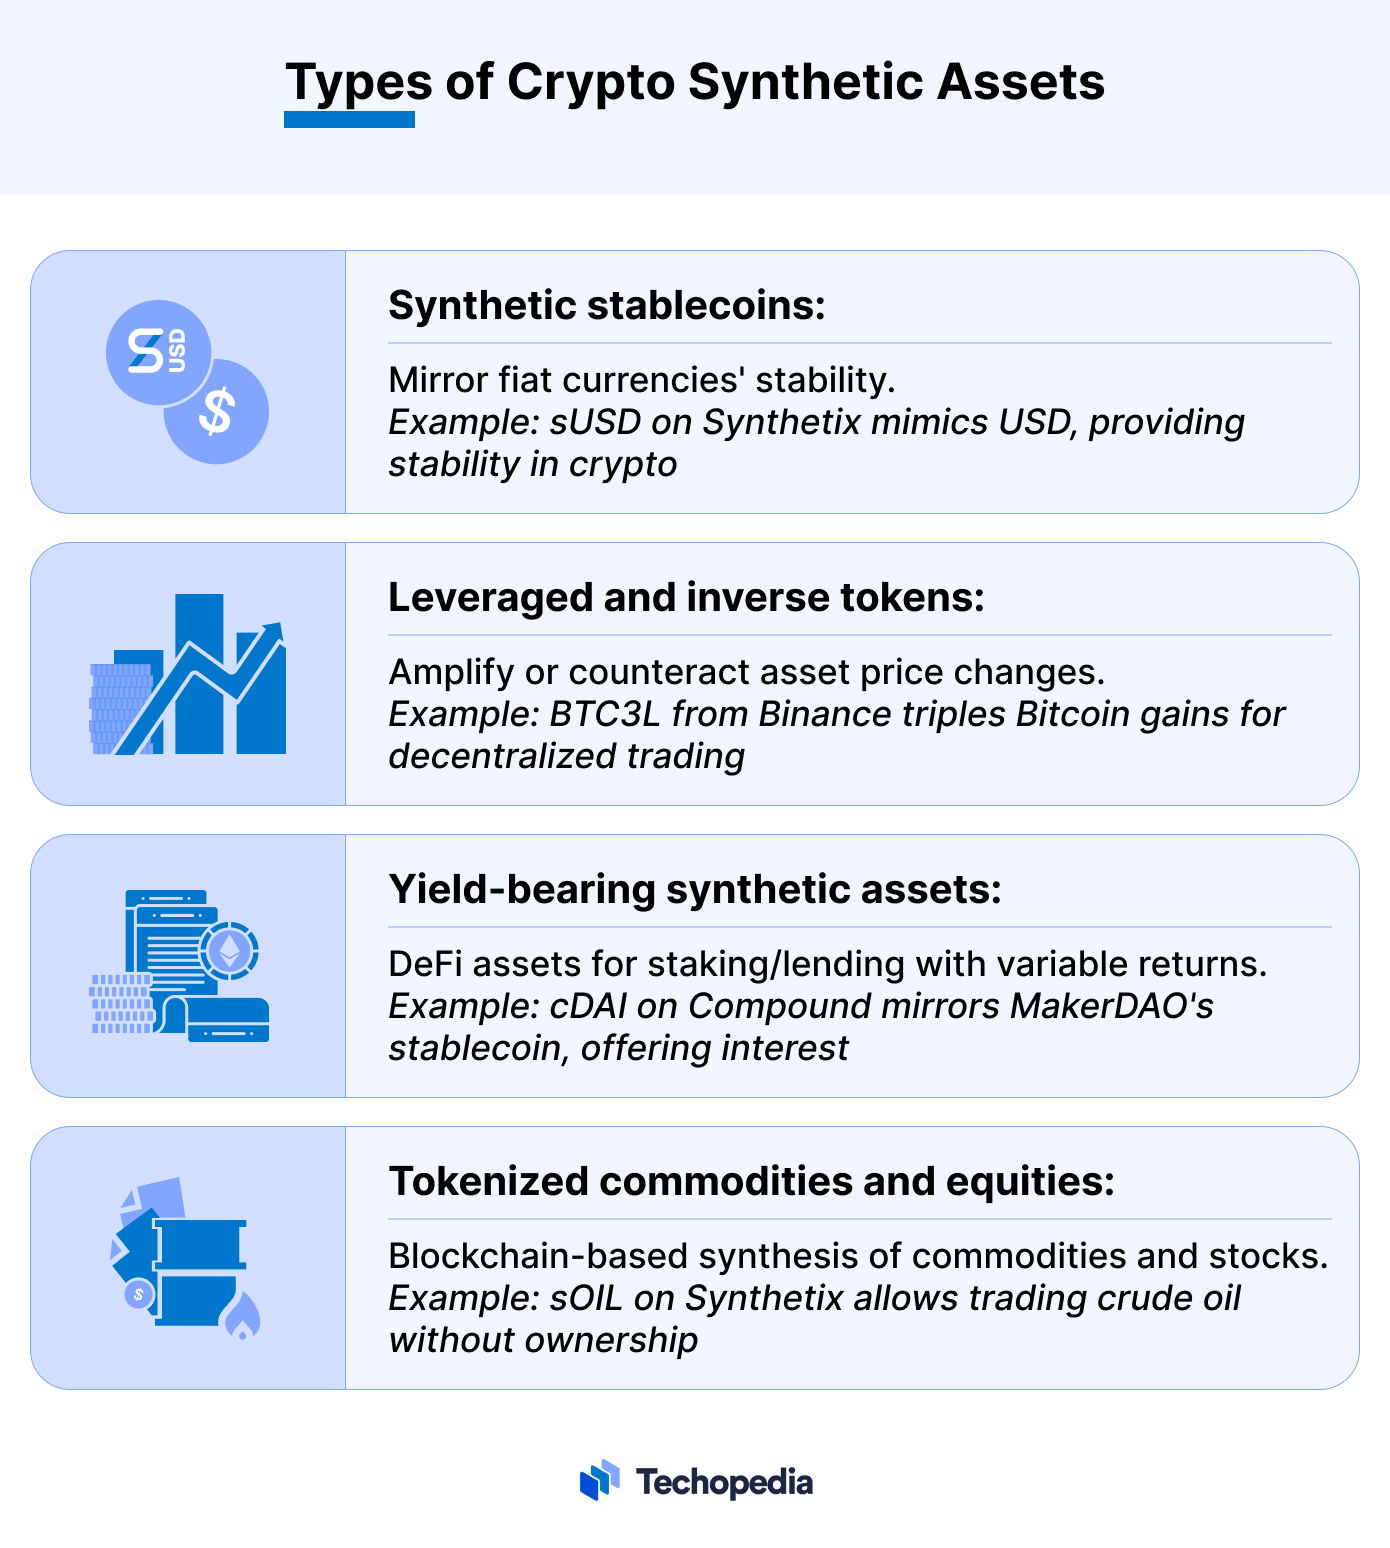 Types of Crypto Synthetic Assets